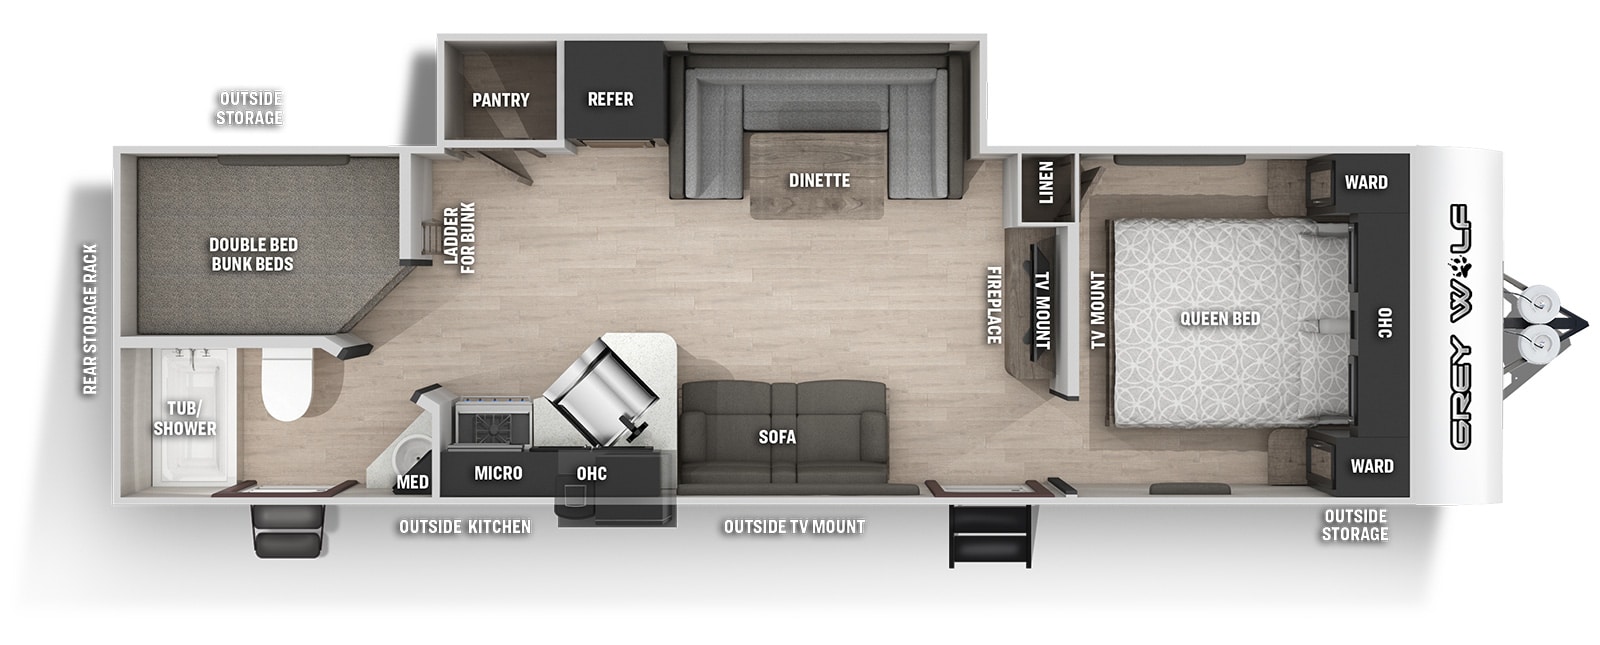 *** NEW *** FOREST RIVER CHEROKEE GREY WOLF 26BRB Floor Plan